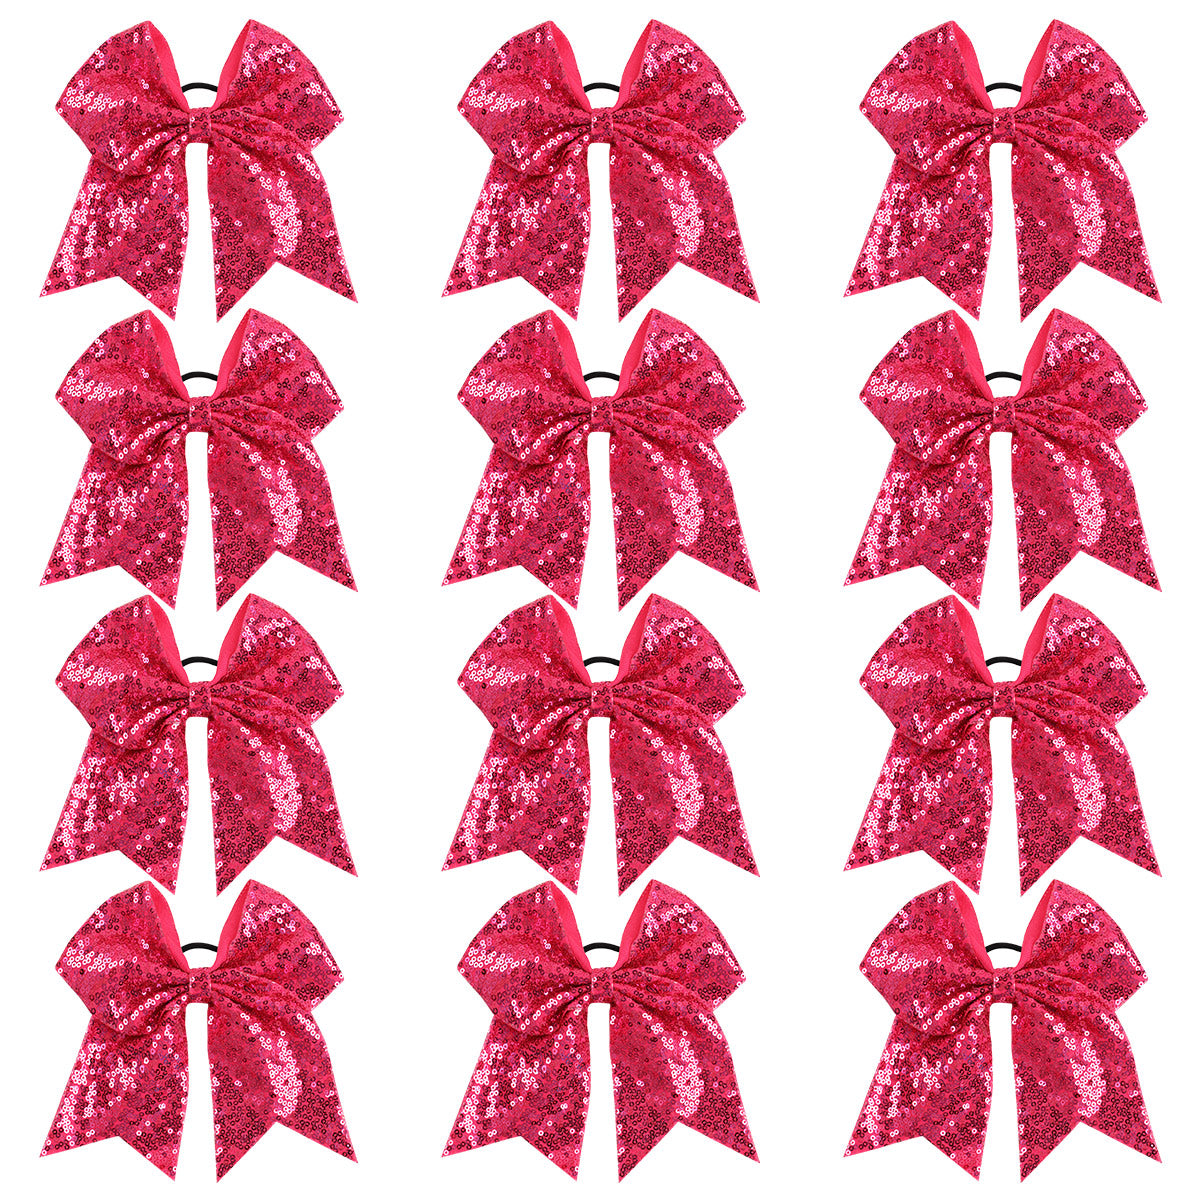 12PCS Sequin Cheer Bows for Teen Girls